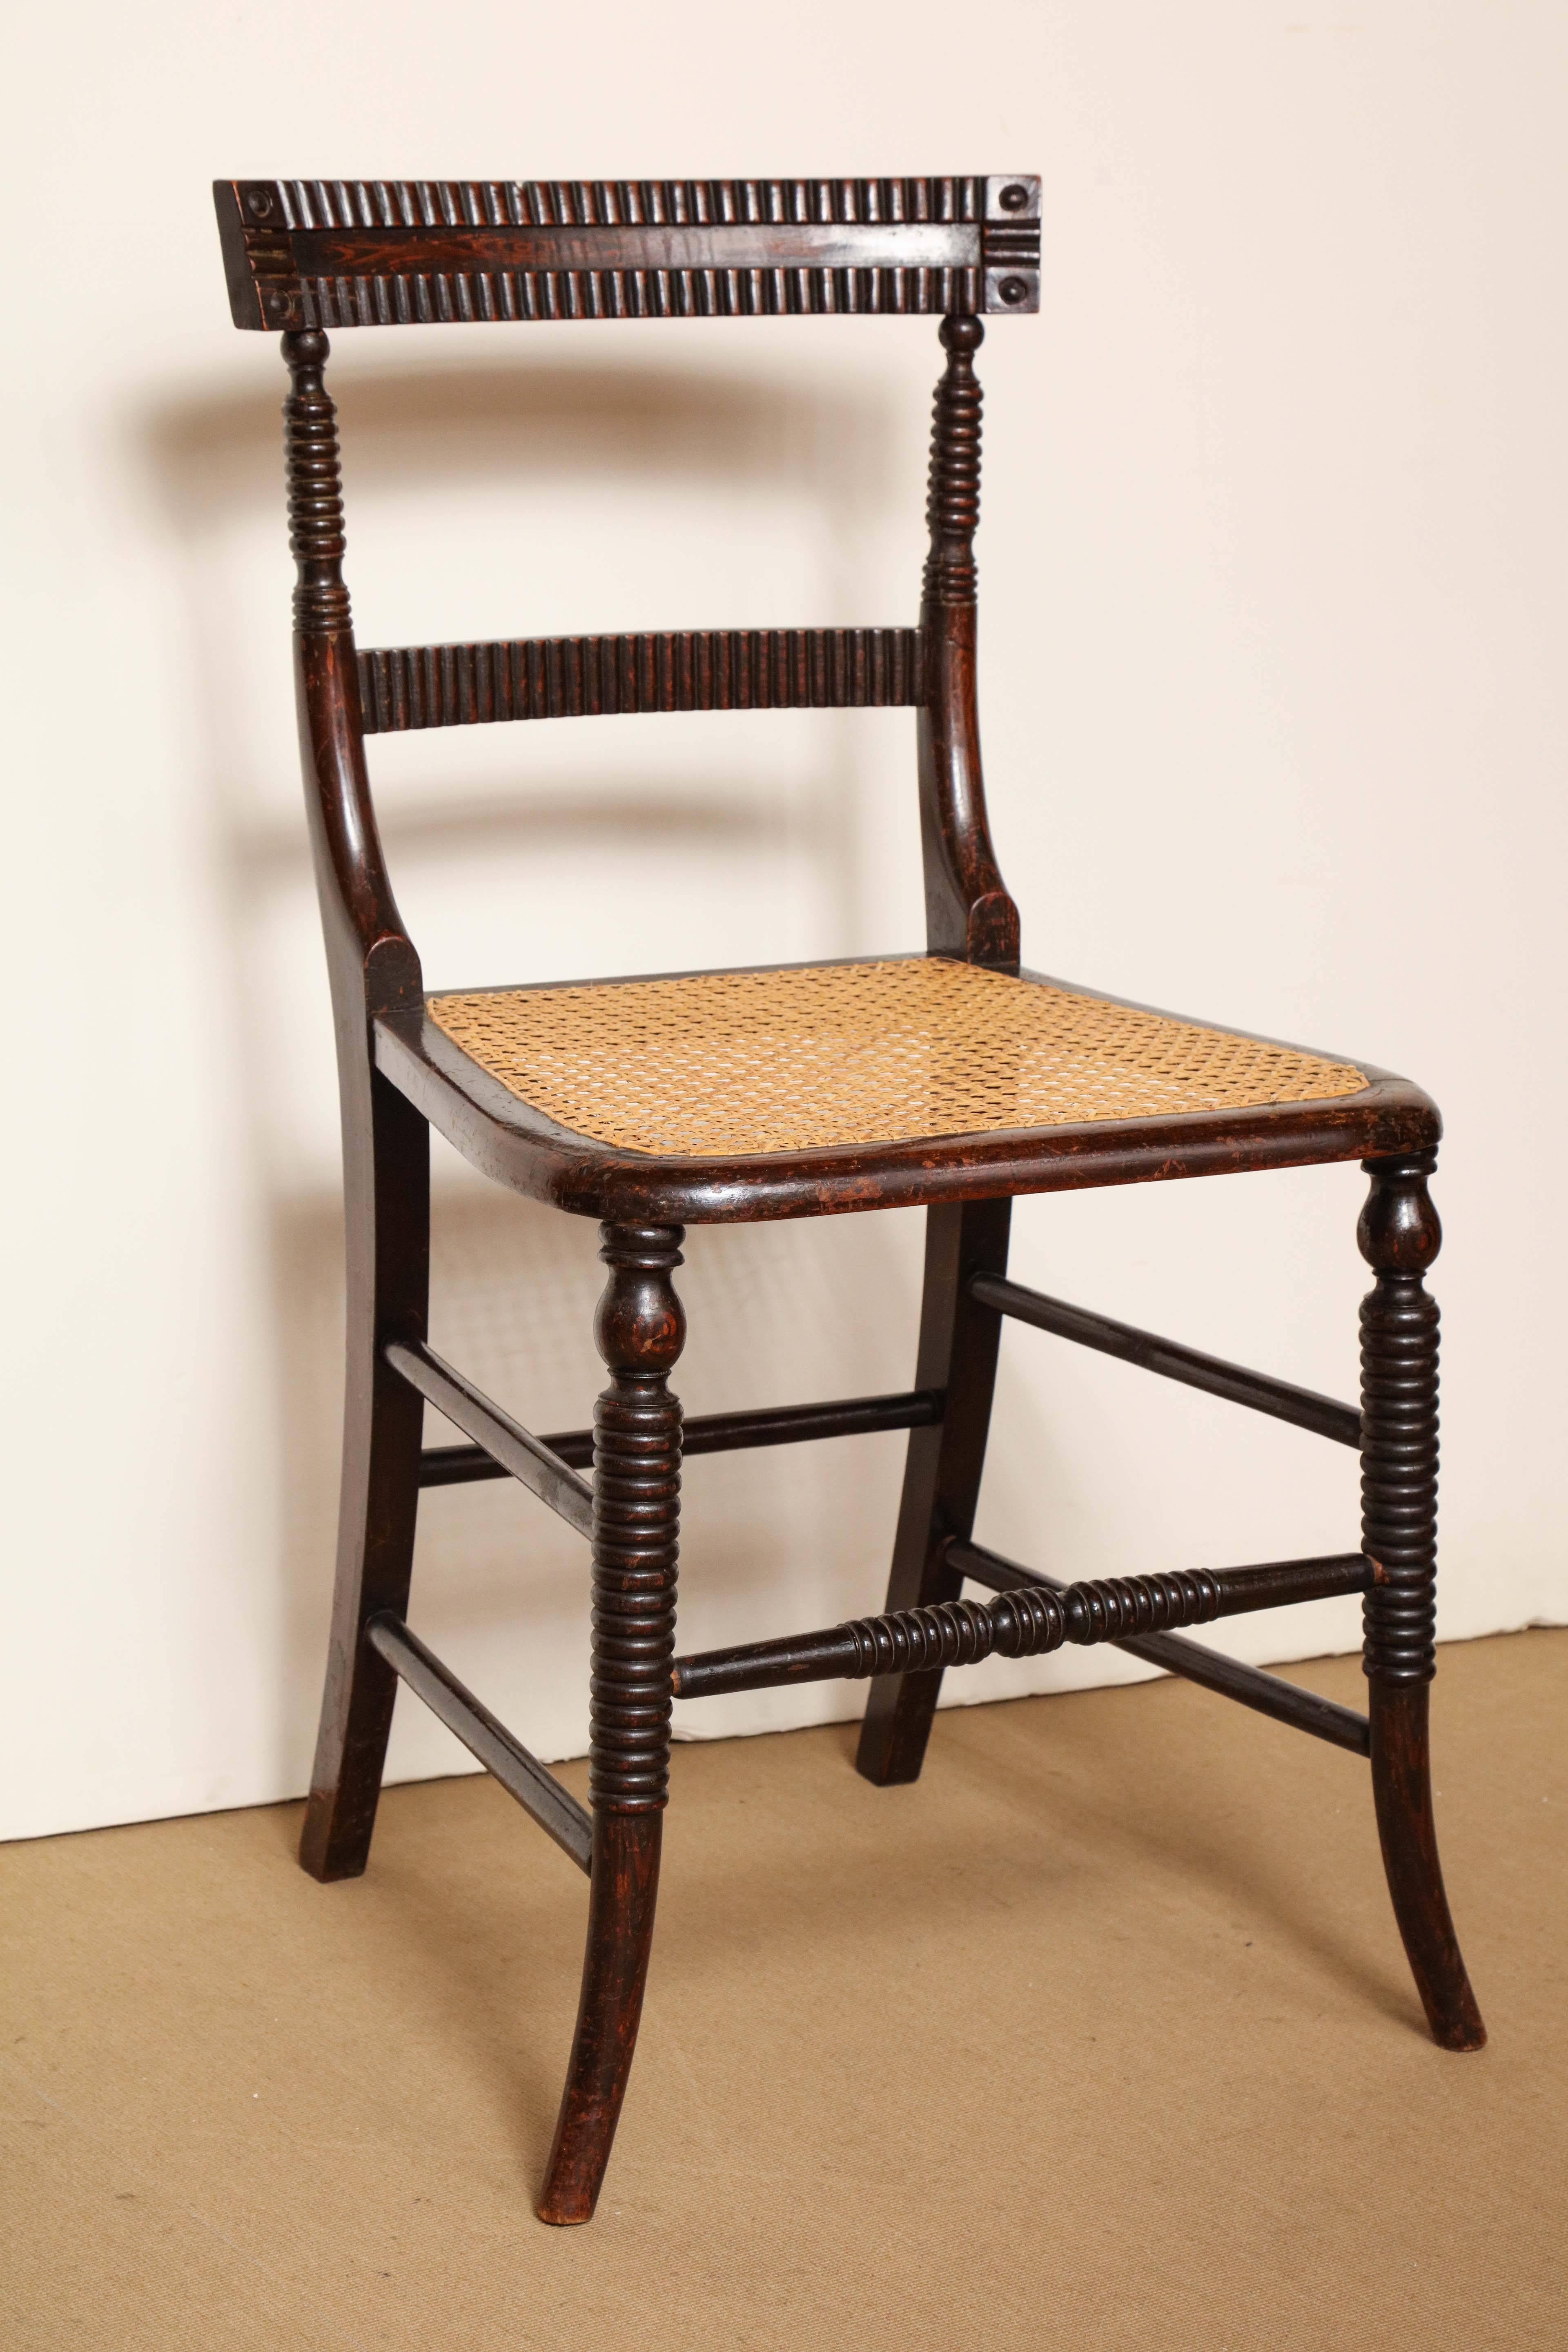 Early 19th century English regency faux rosewood caned chair.